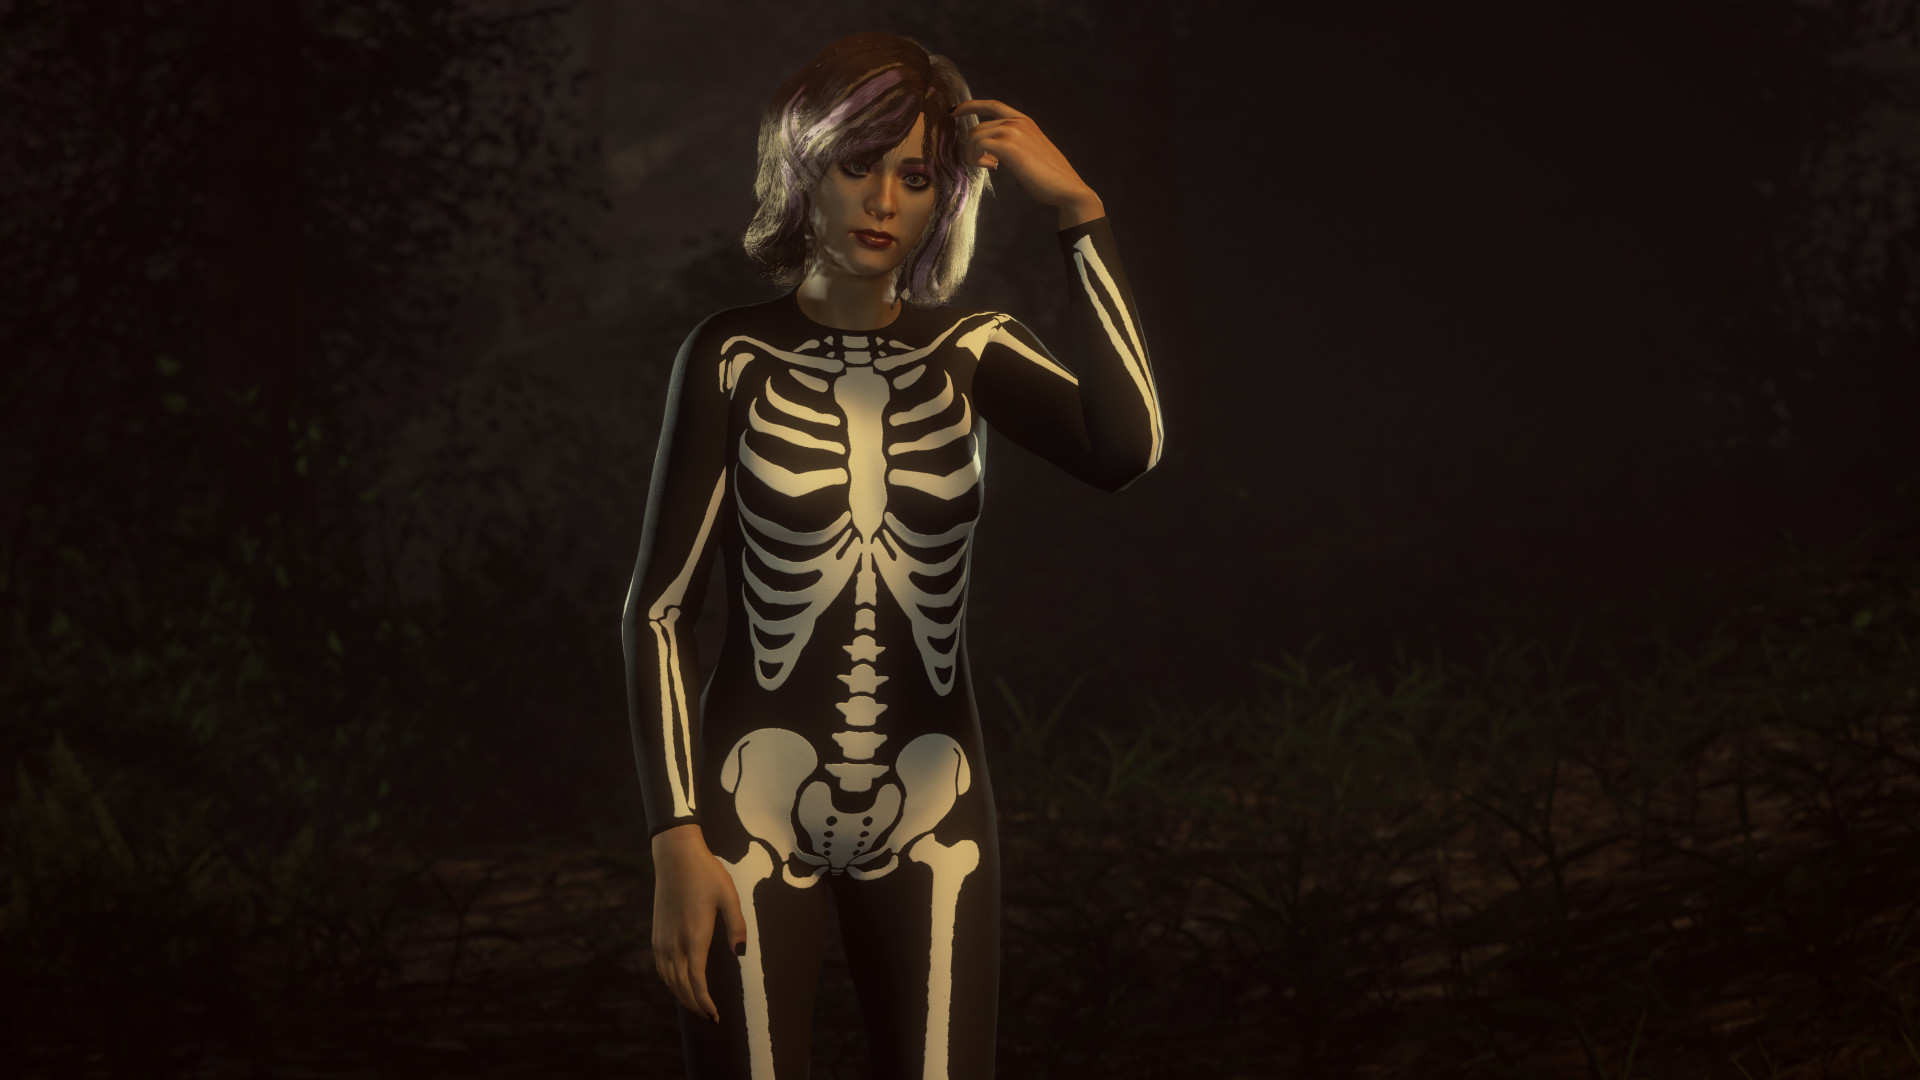 Friday the 13th: The Game - Costume Party Counselor Clothing Pack Featured Screenshot #1